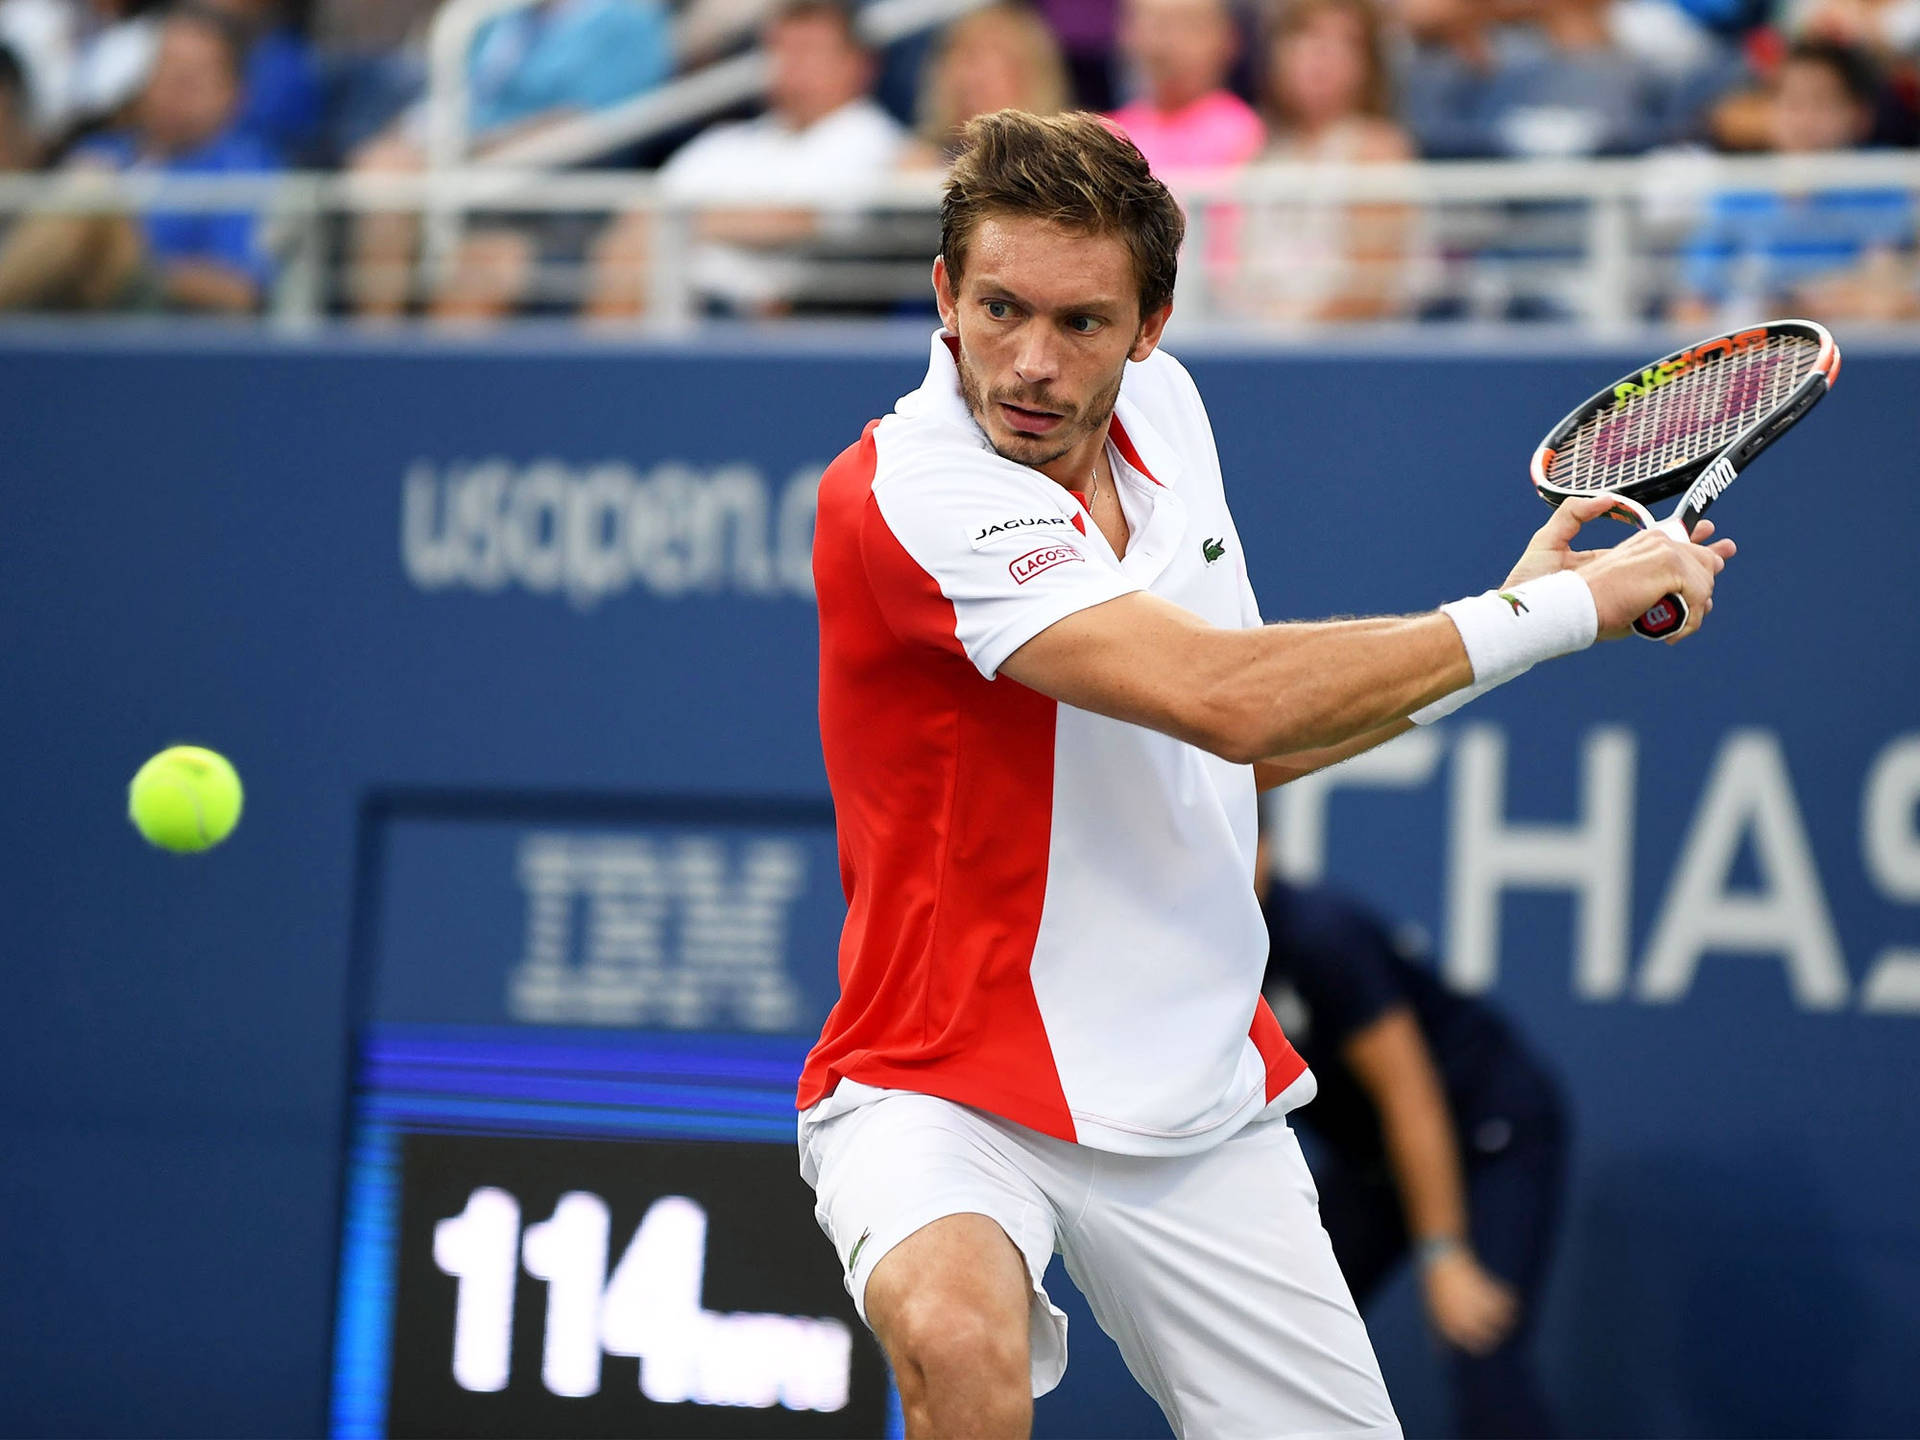 Professional Tennis Player Nicolas Mahut intensely focusing on the ball during a match. Wallpaper